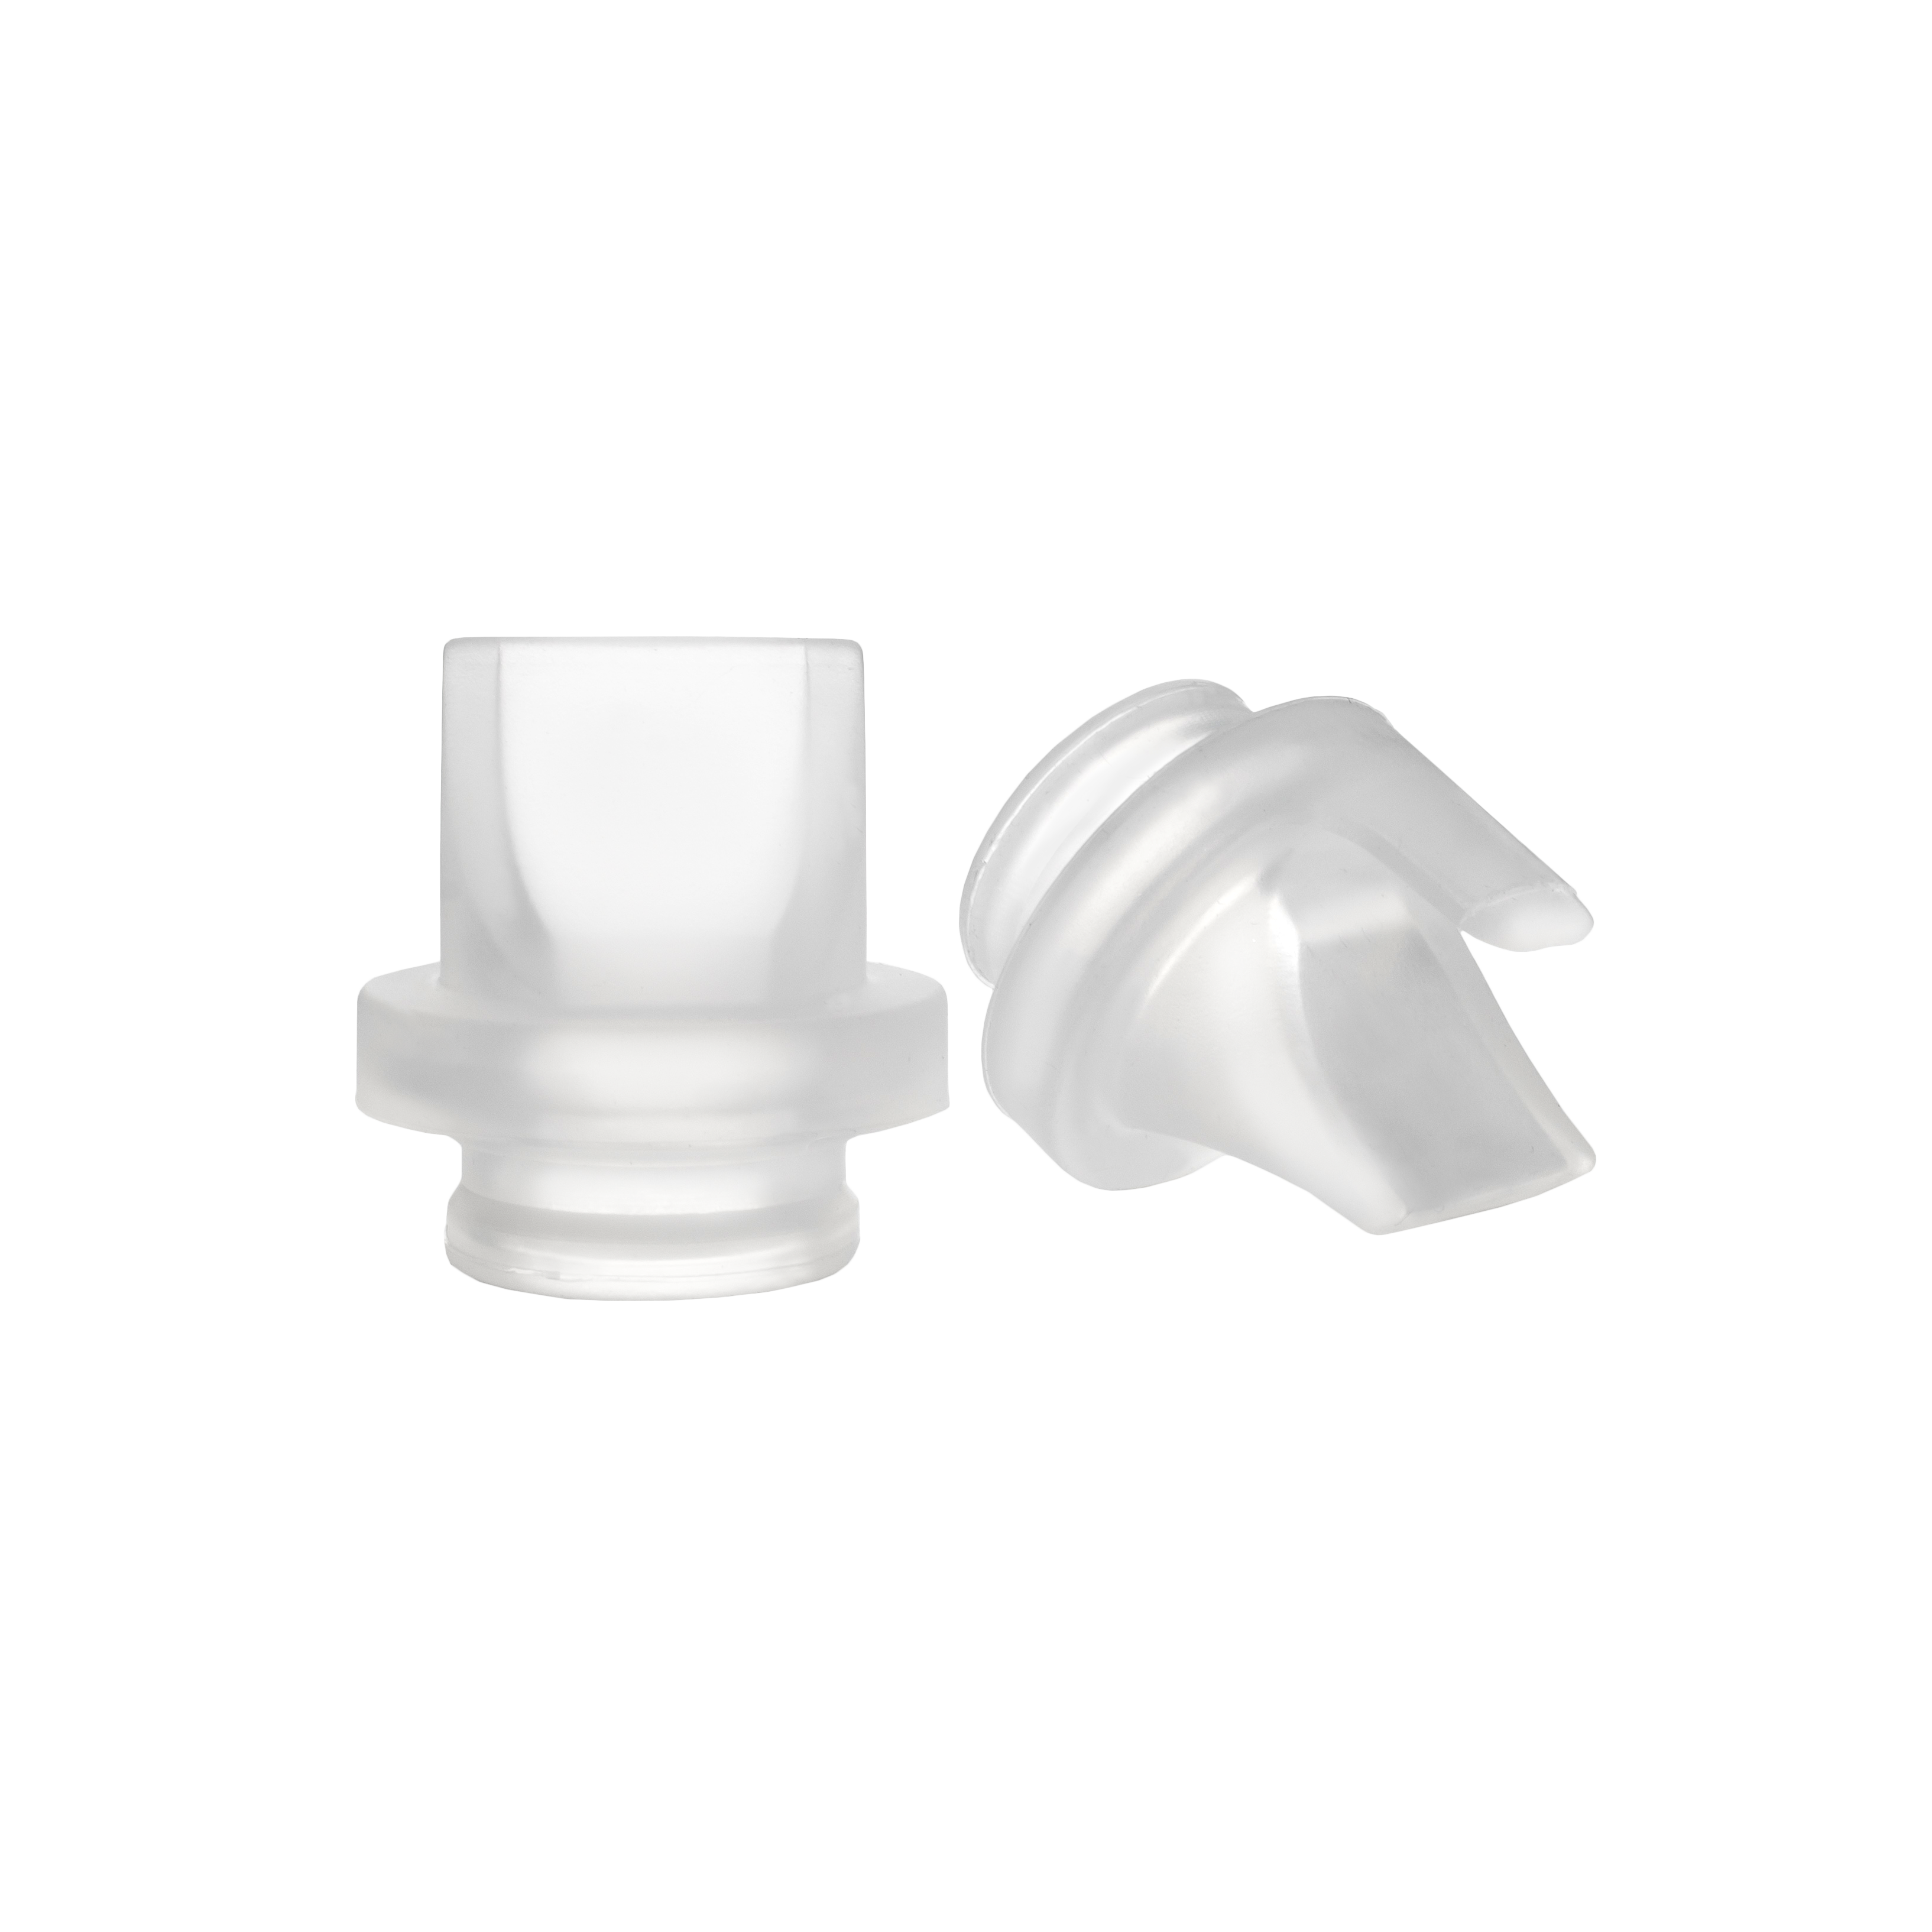 FlexSkin Replacement Silicone Valves